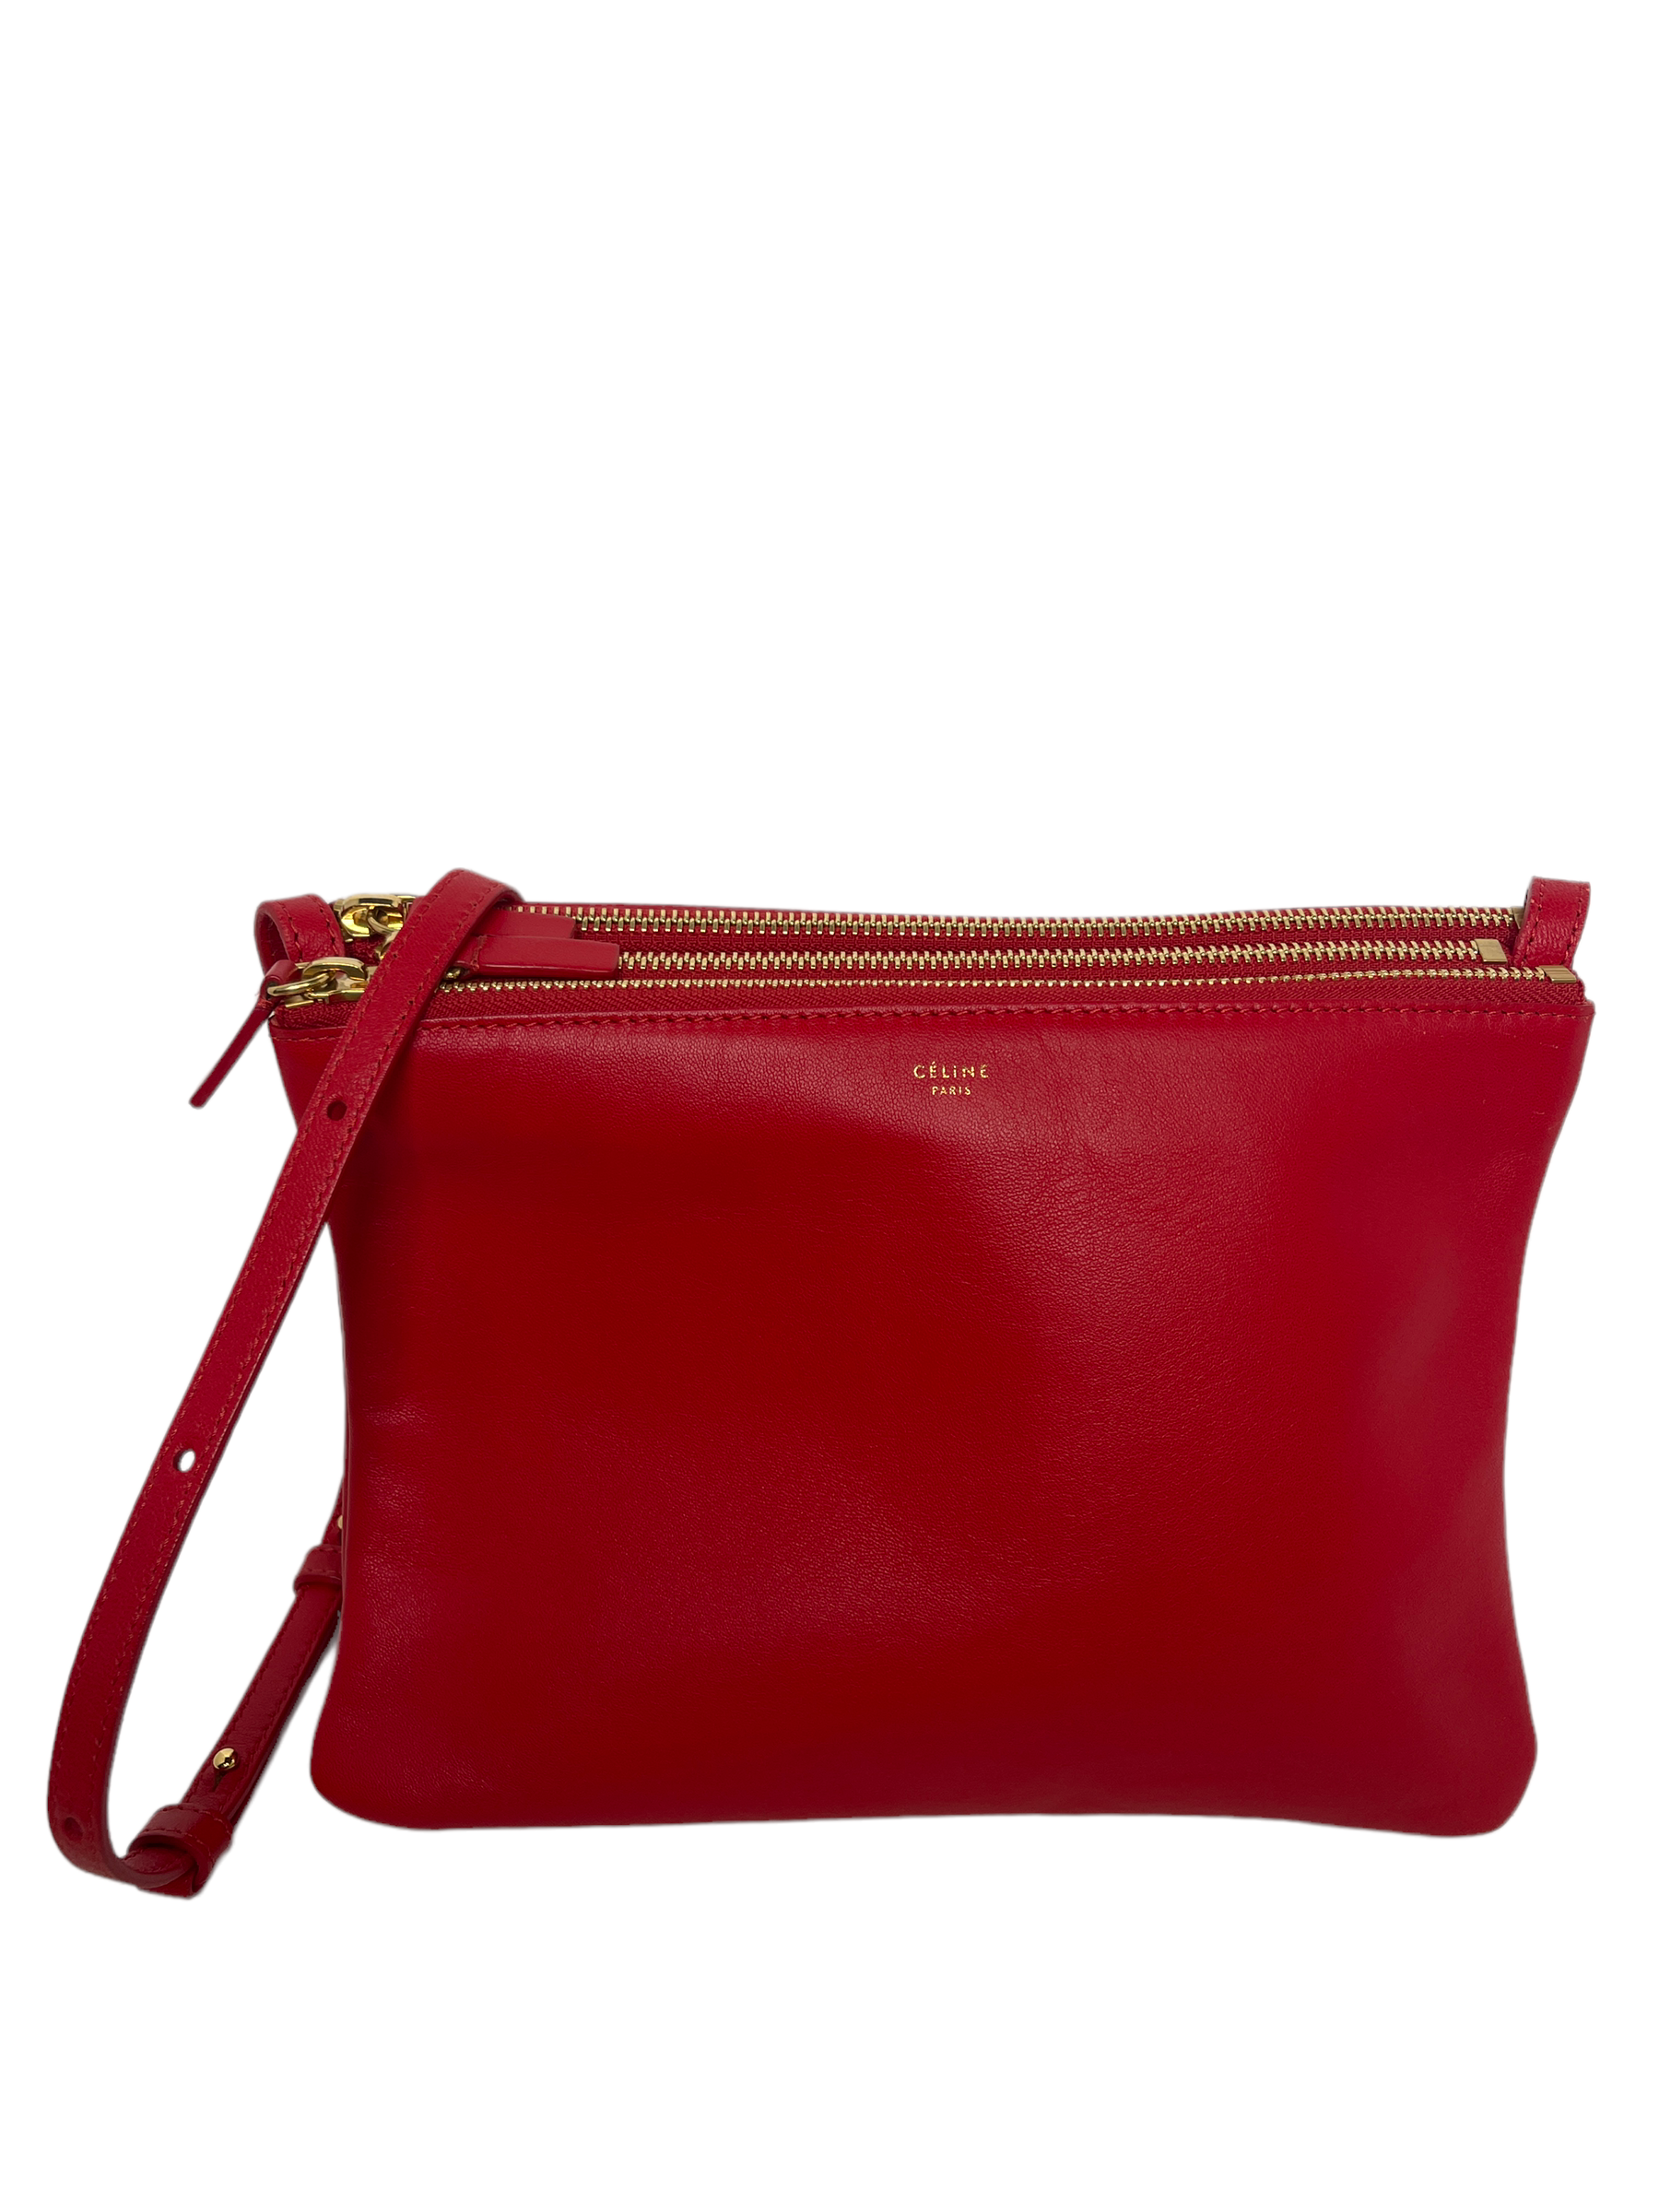 Celine Trio Bag: What Color, Leather And Price?